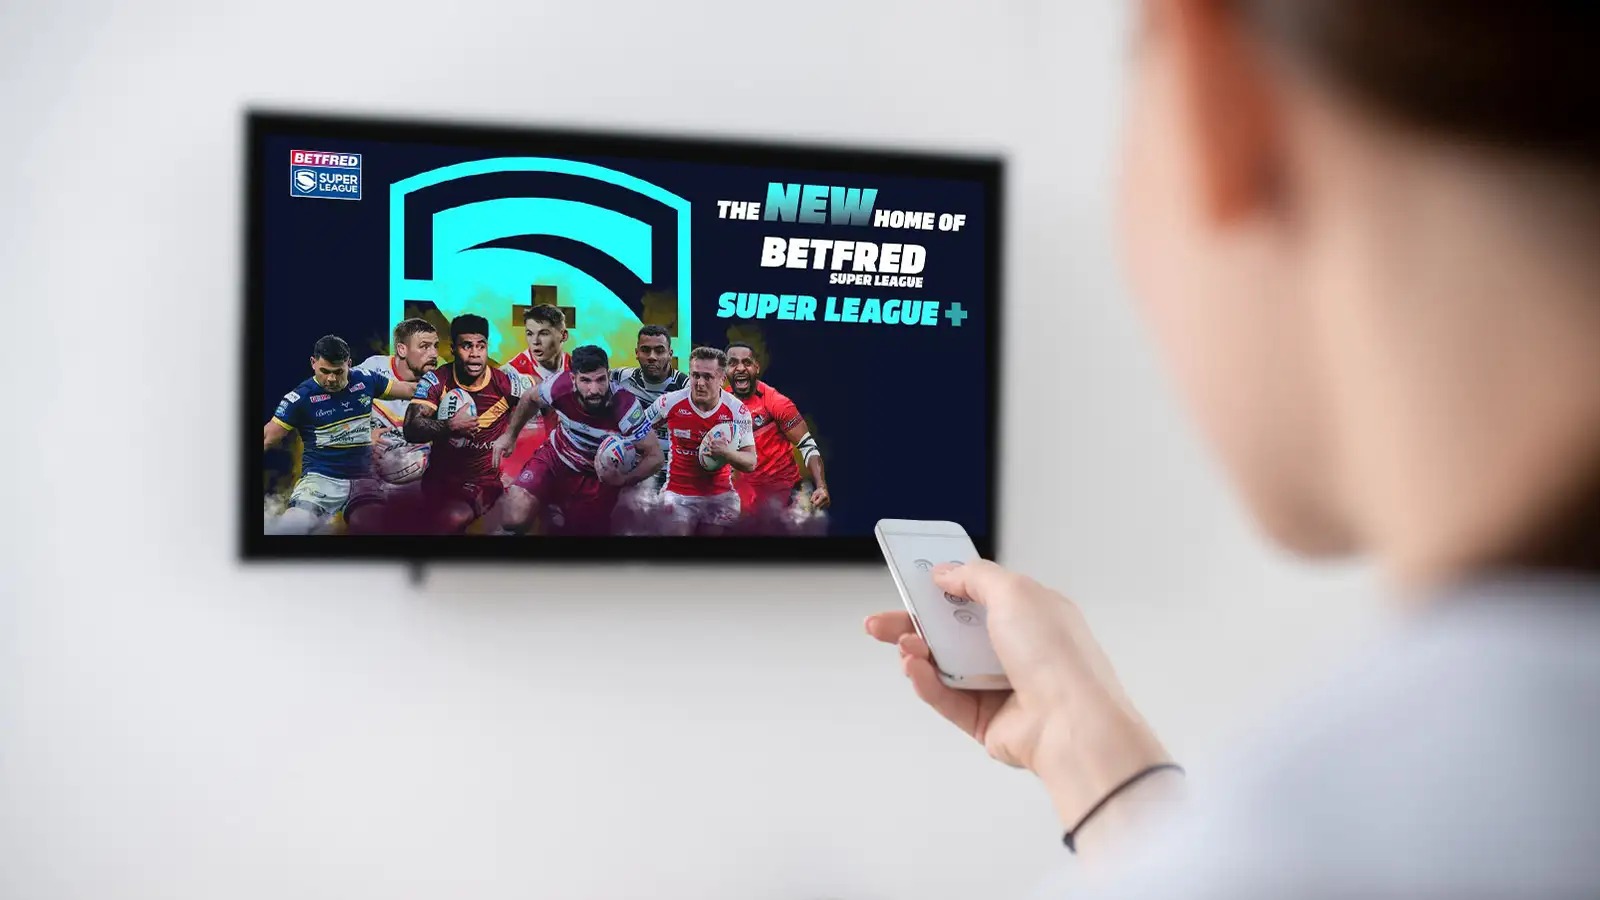 Super League+: Everything you need to know about the new streaming service, including prices and how to access